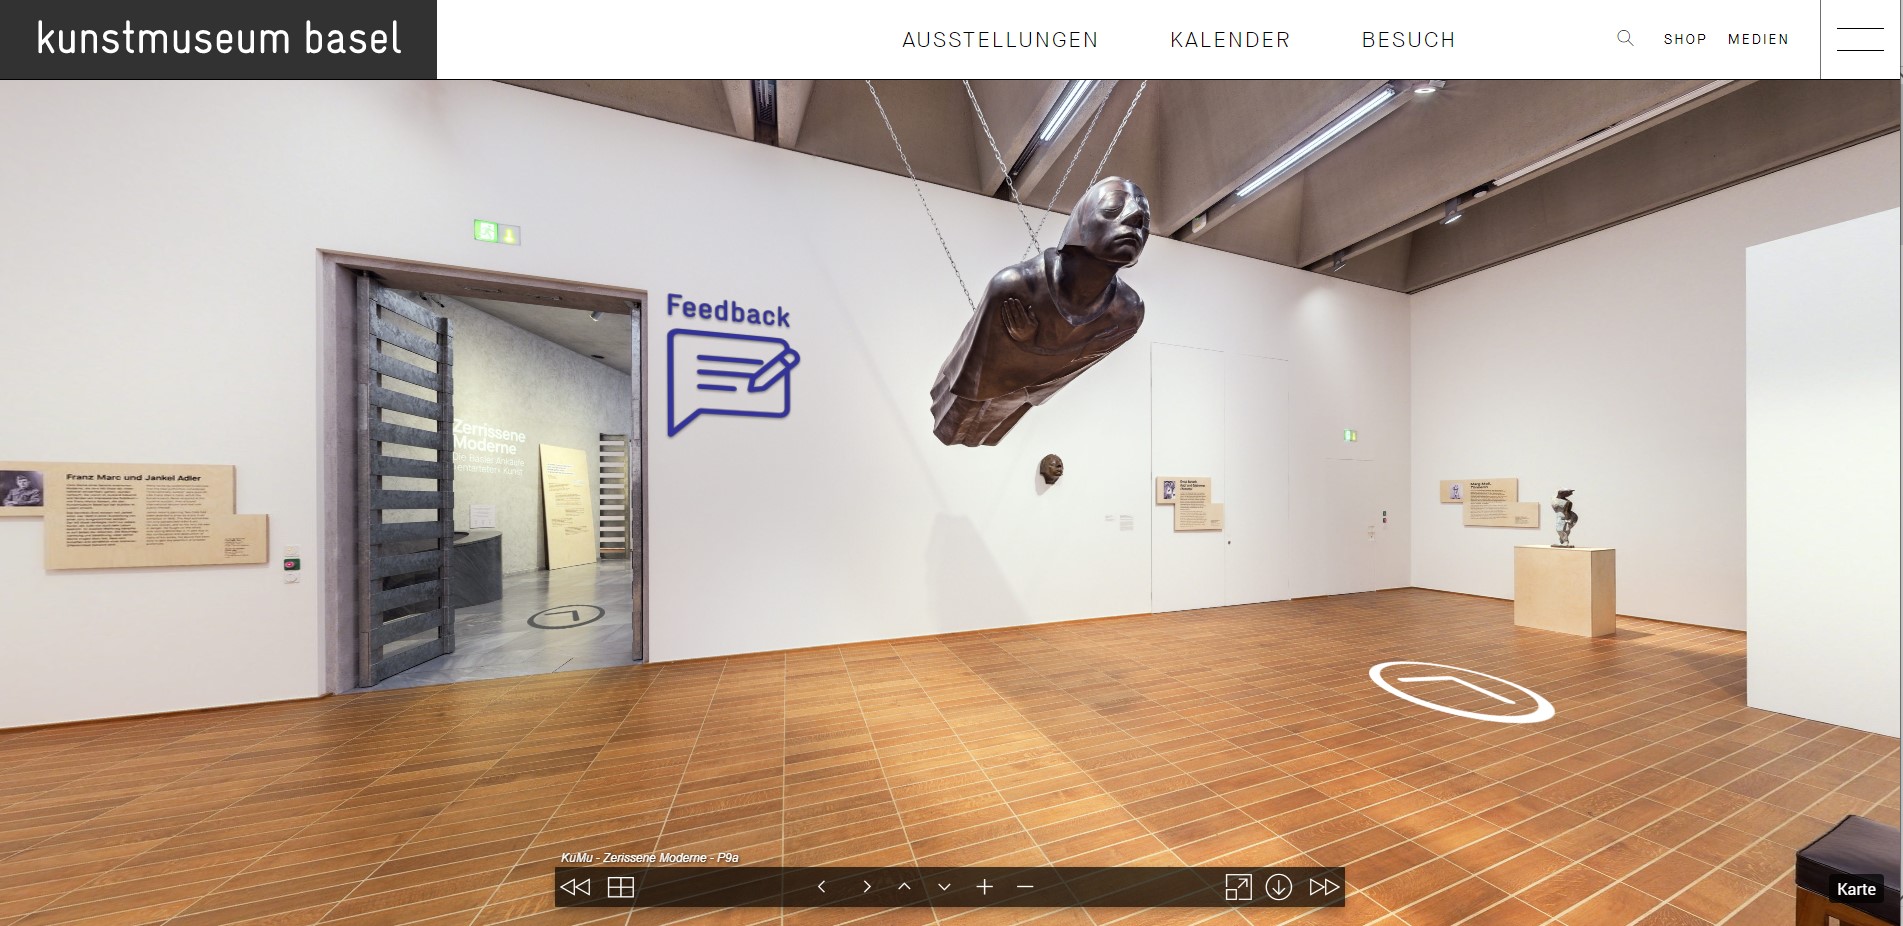 Exhibitions and exhibits in the highest resolution with cura3D 360° InteractiveTour Photo. The virtual tour of the exhibition “Torn Modernism” at the Kunstmuseum Basel